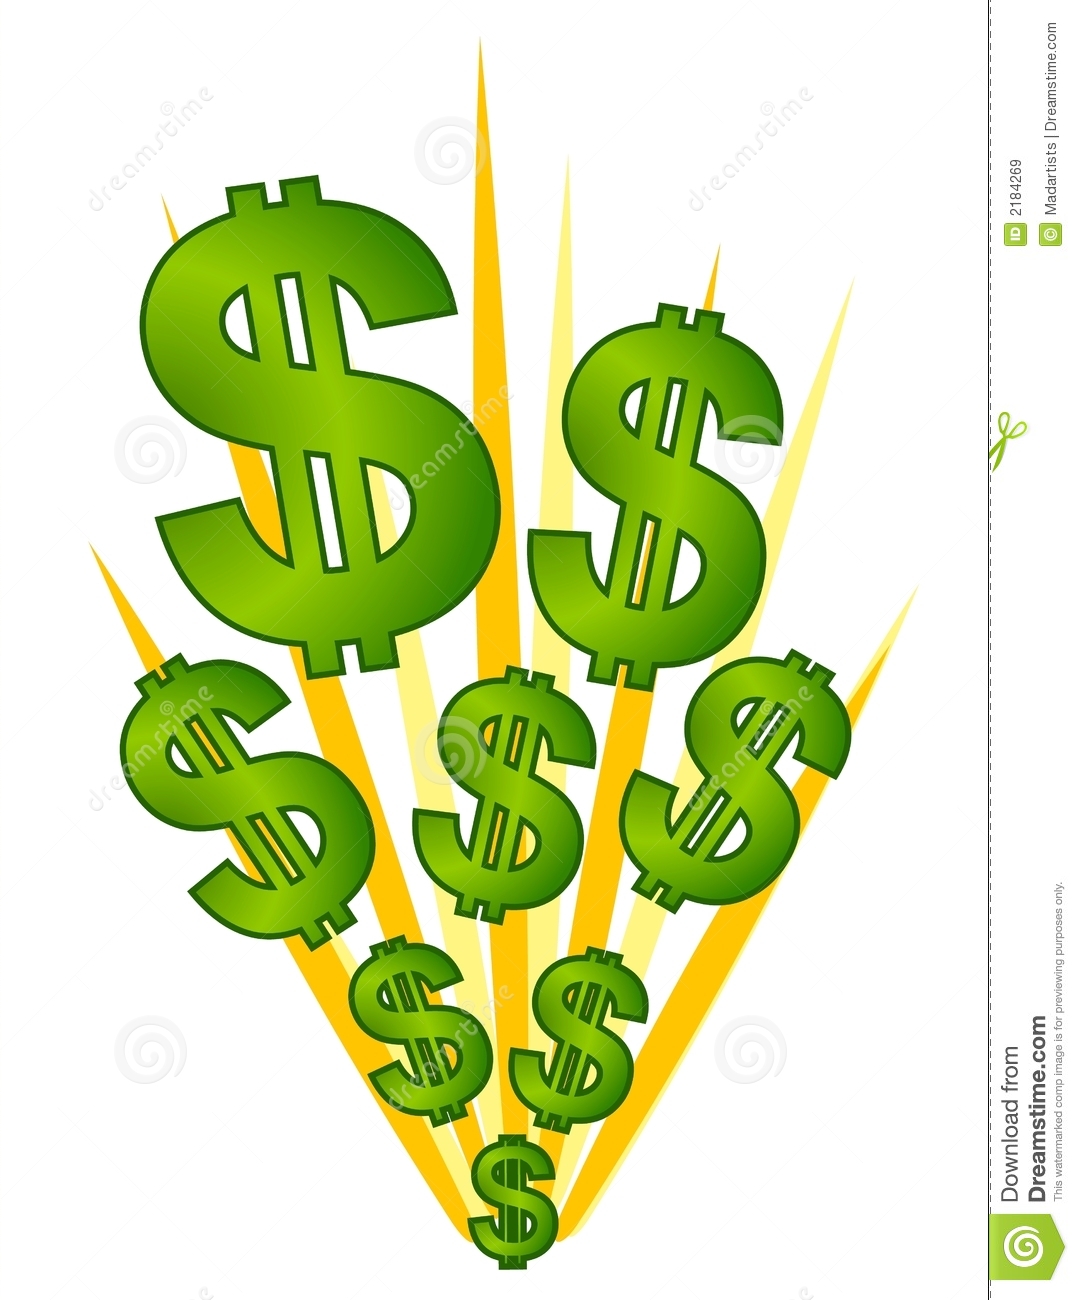 Cash And Money Illustration Of Dollar Signs Exploding Representing